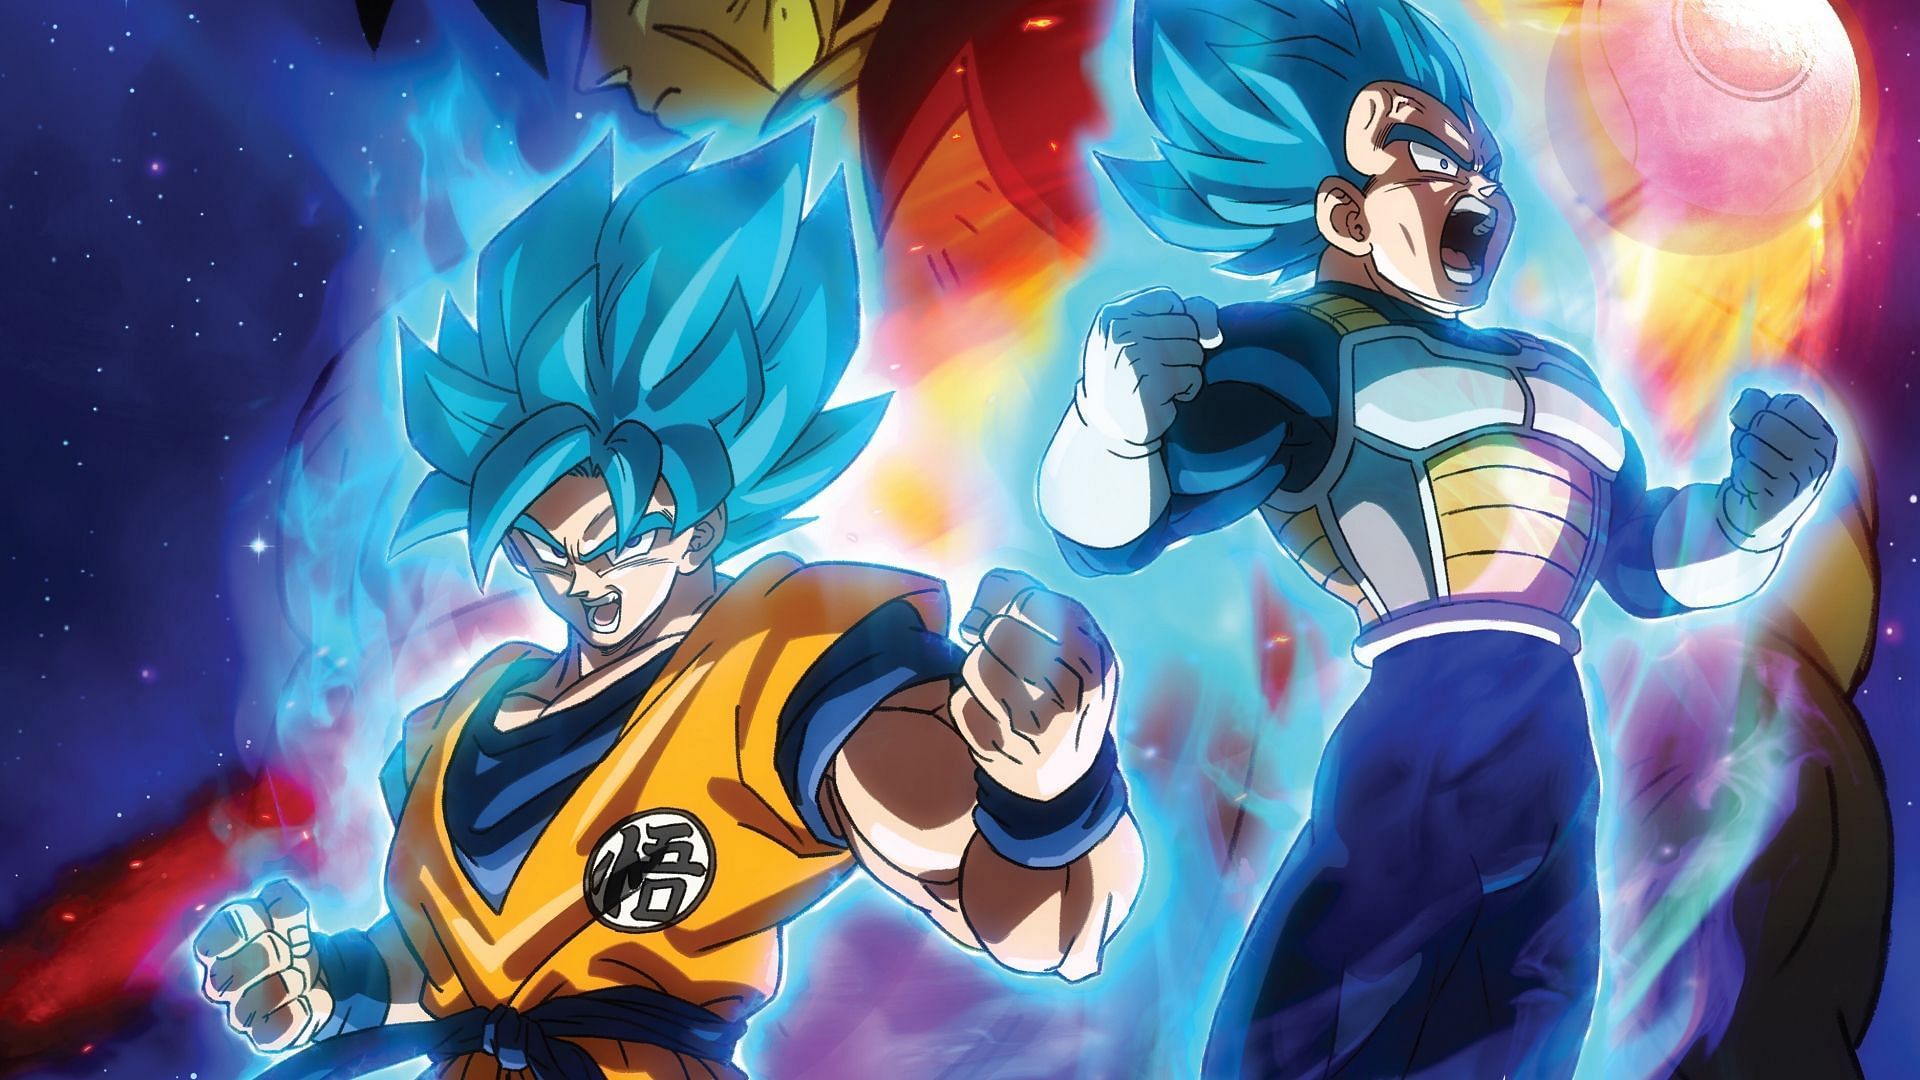 Goku (left) and Vegeta (right) as seen in the Super: Broly film